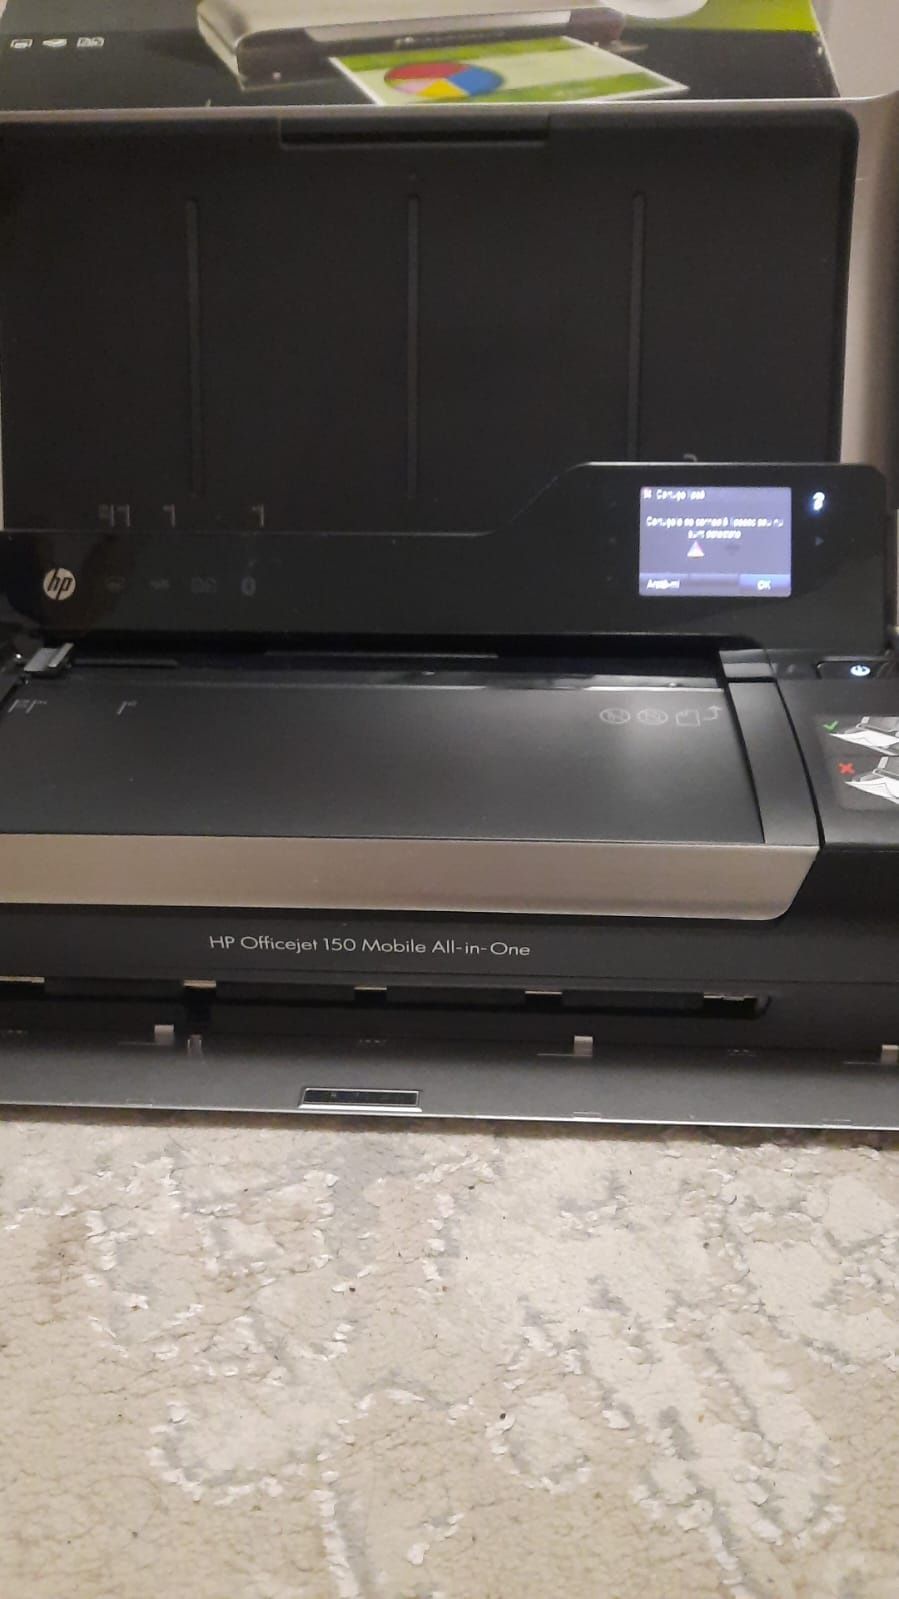 Imprimanta HP Officejet 150 Mobile All in One